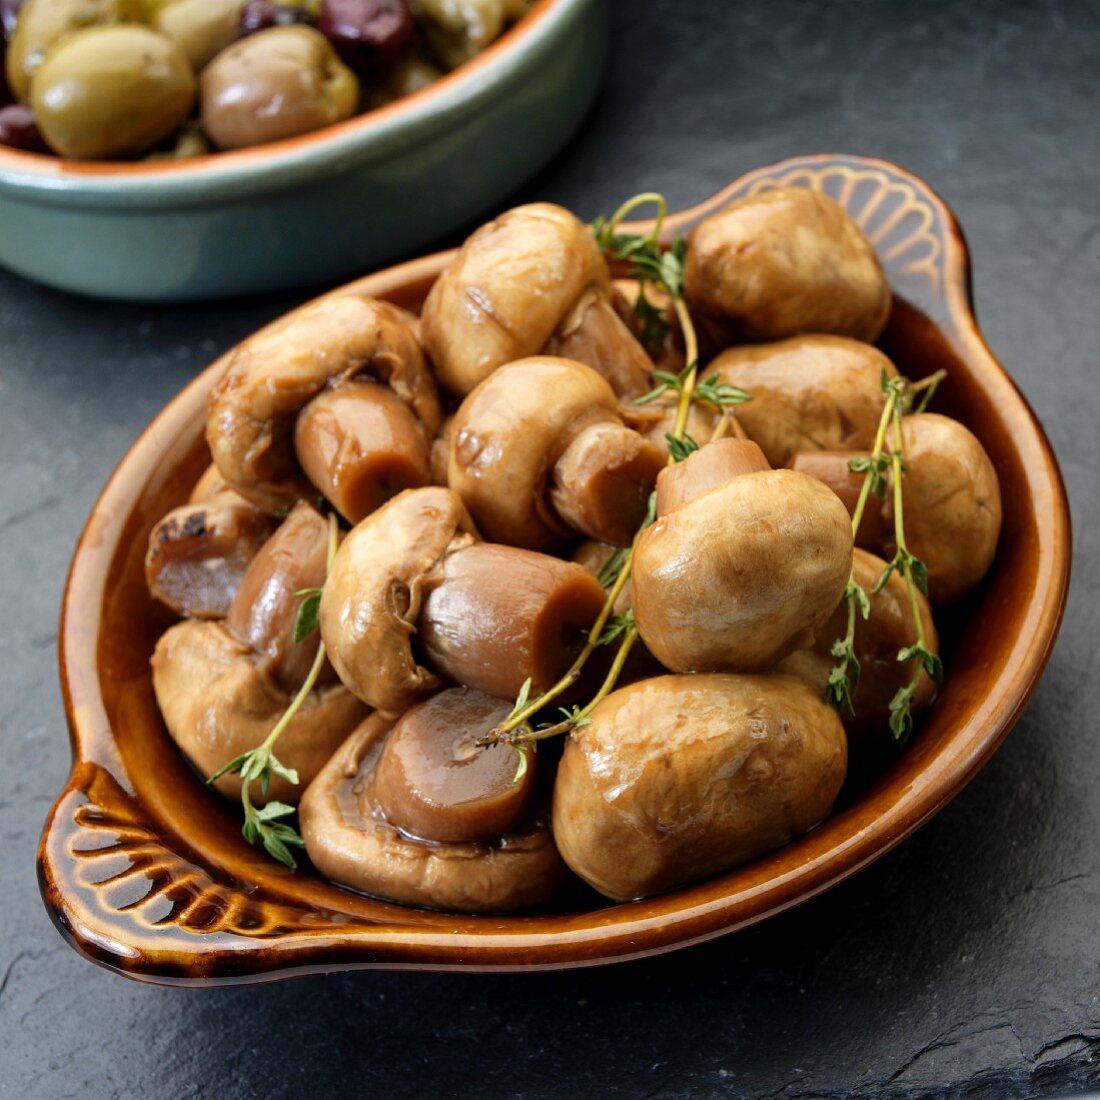 Marinated mushrooms with thyme as tapas in a dish (Spain)